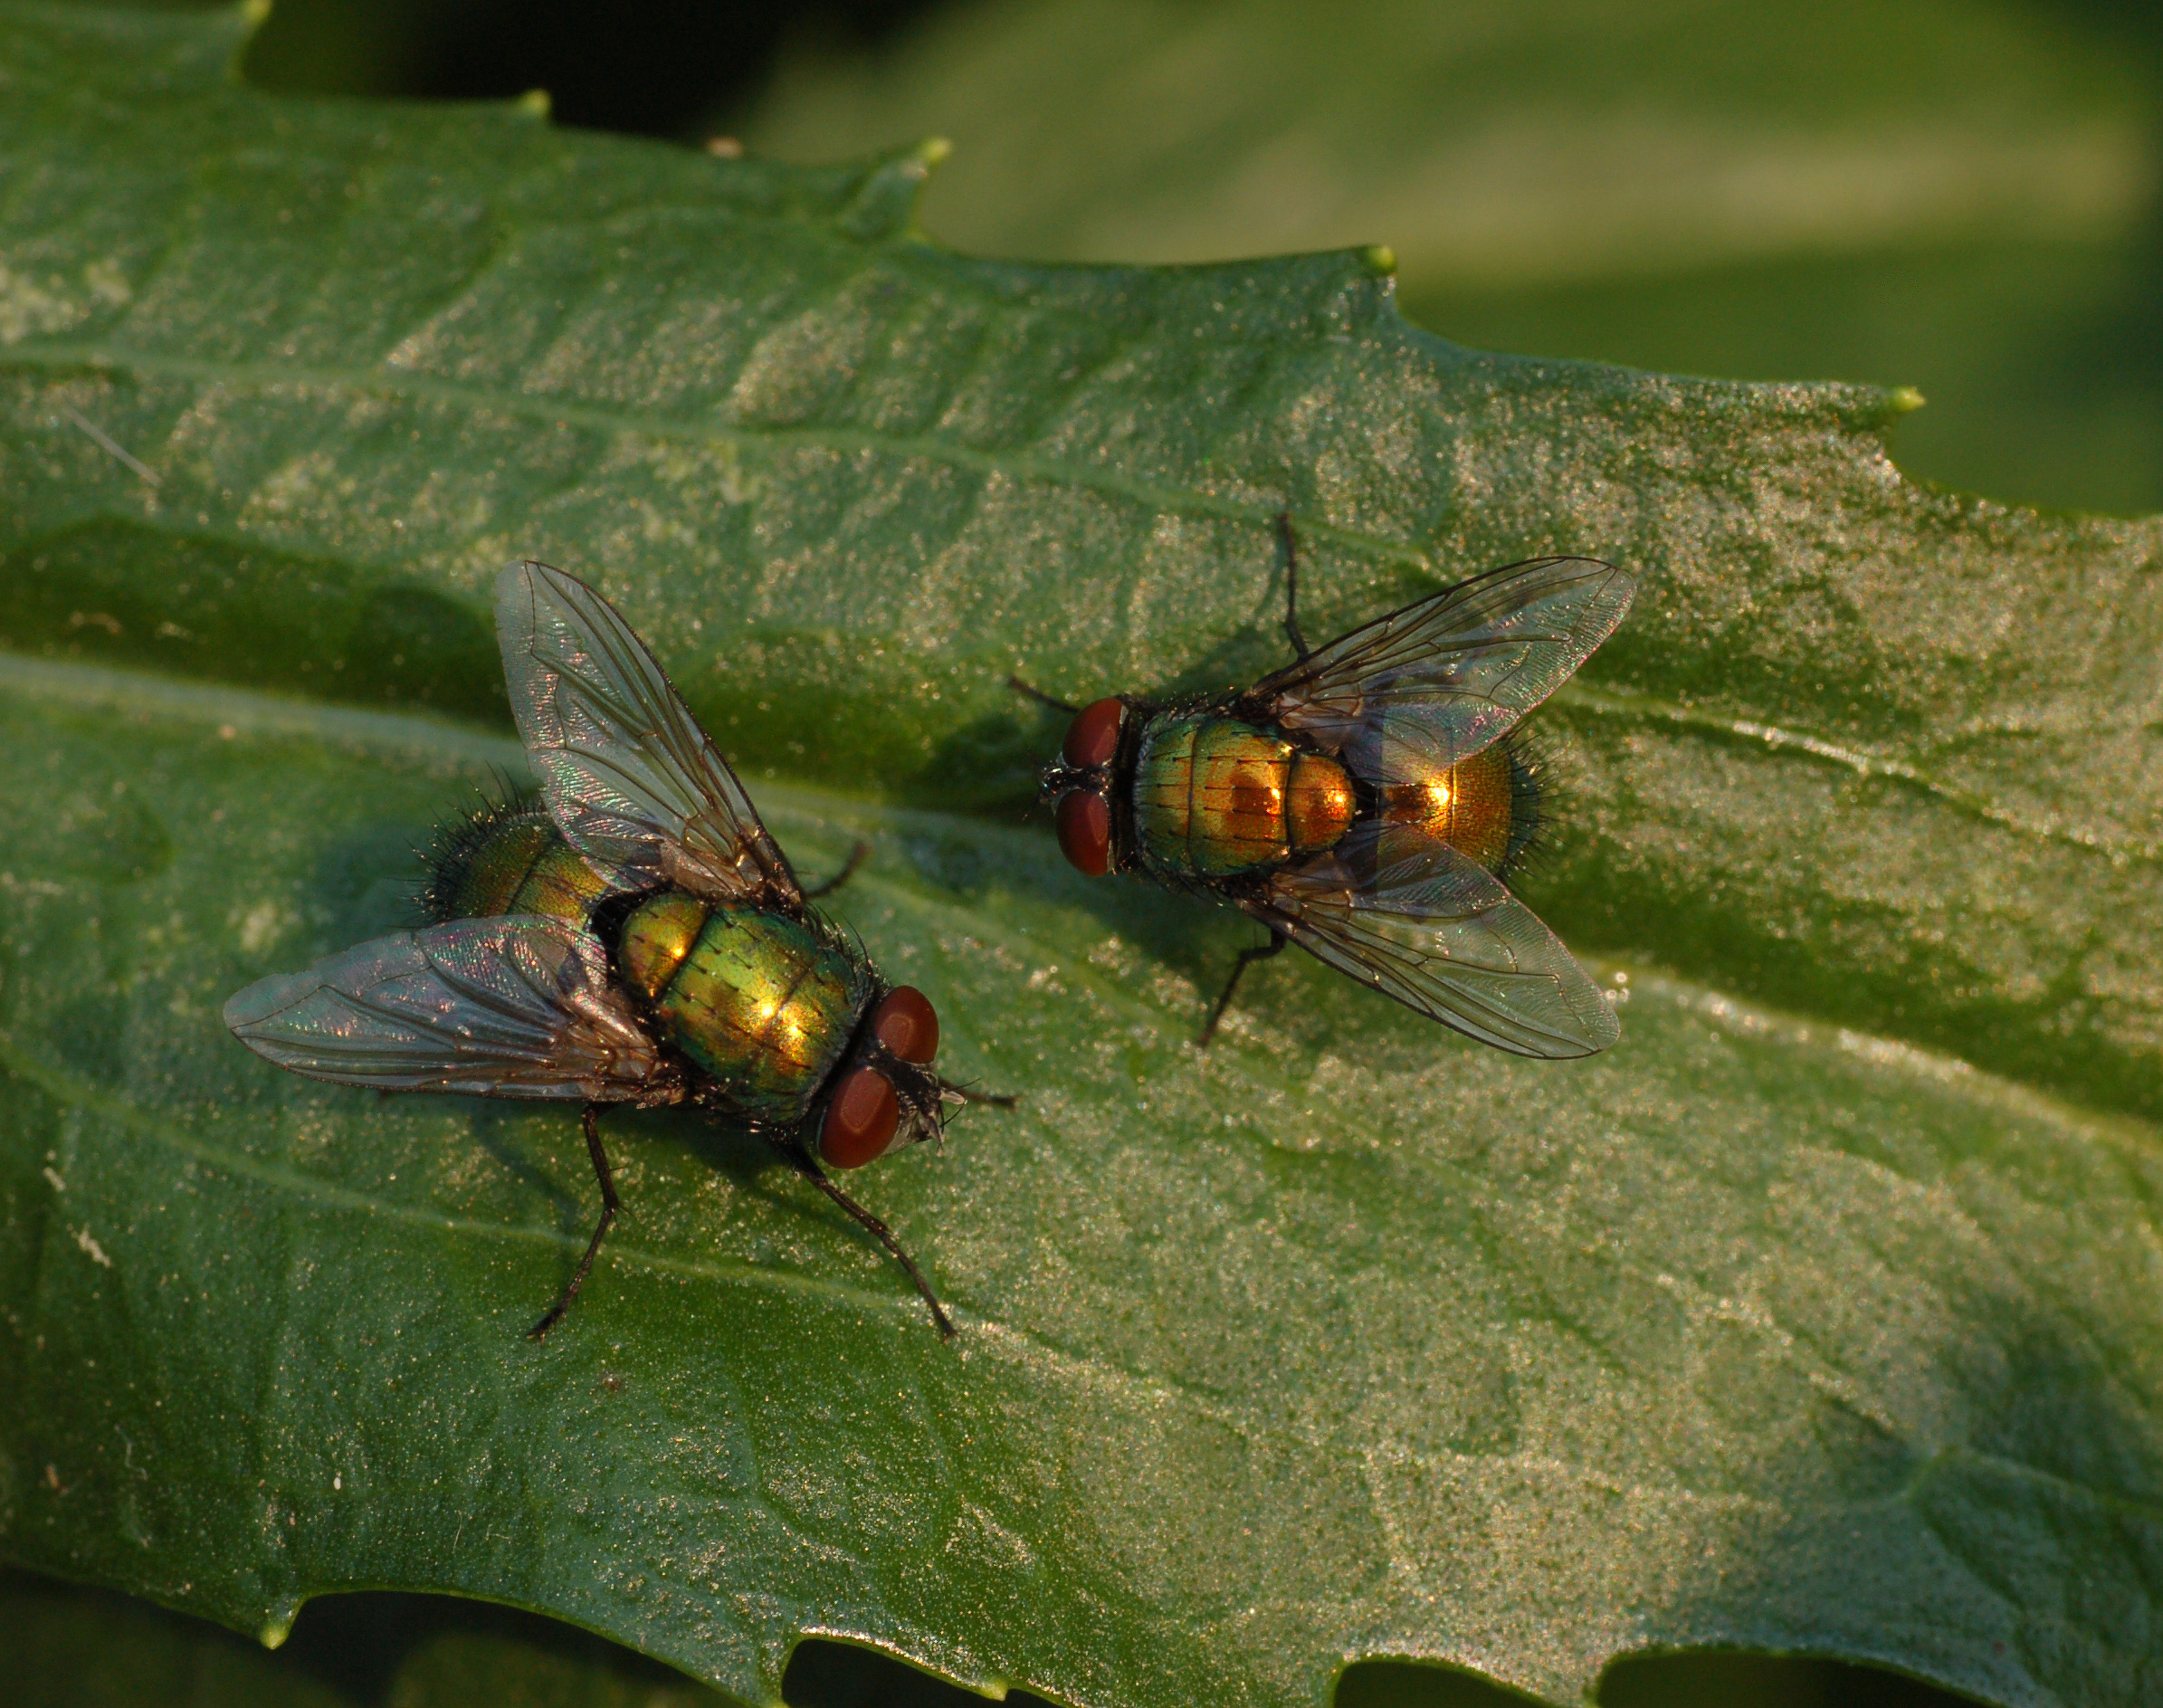 Unidentified Pair of Flies on a Leaf 2390px